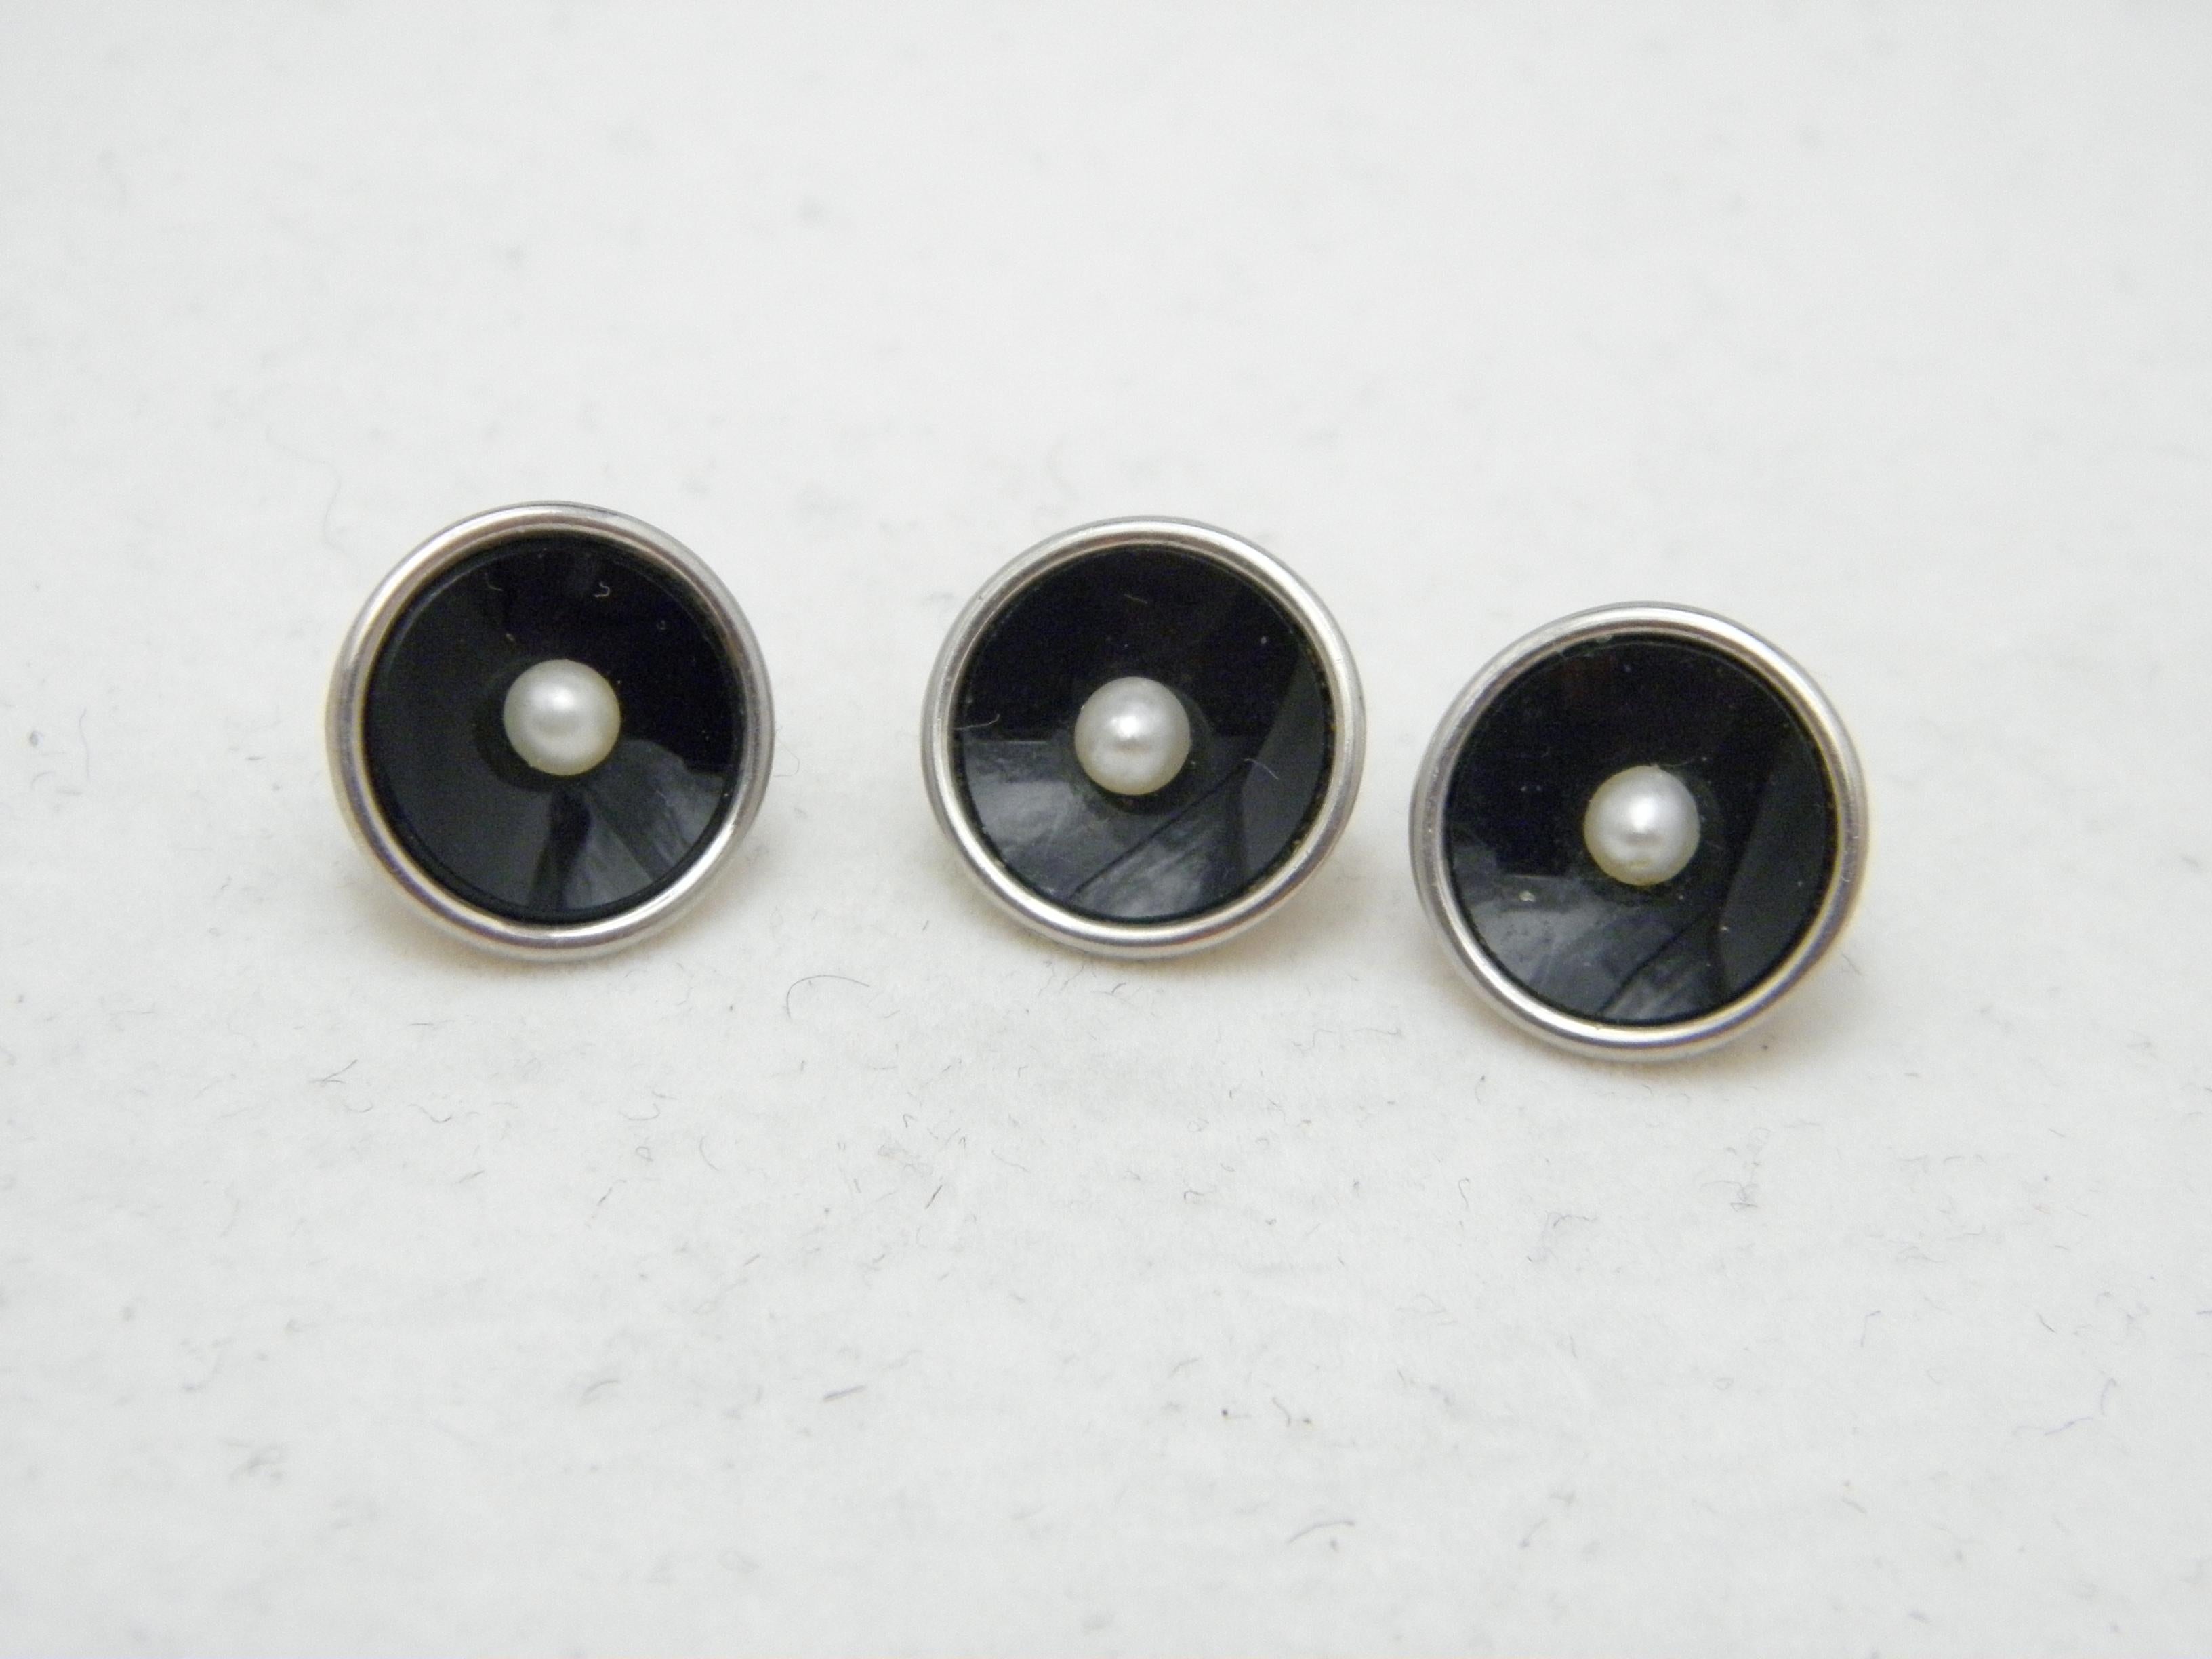 If you have landed on this page then you have an eye for beauty.

On offer is this gorgeous

18CT SOLID GOLD, PLATINUM, ONYX AND PEARL SHIRT STUDS BUTTONS X 3

DETAILS
Material: 18ct (750/000) Solid Yellow Gold with Platinum edging and gem